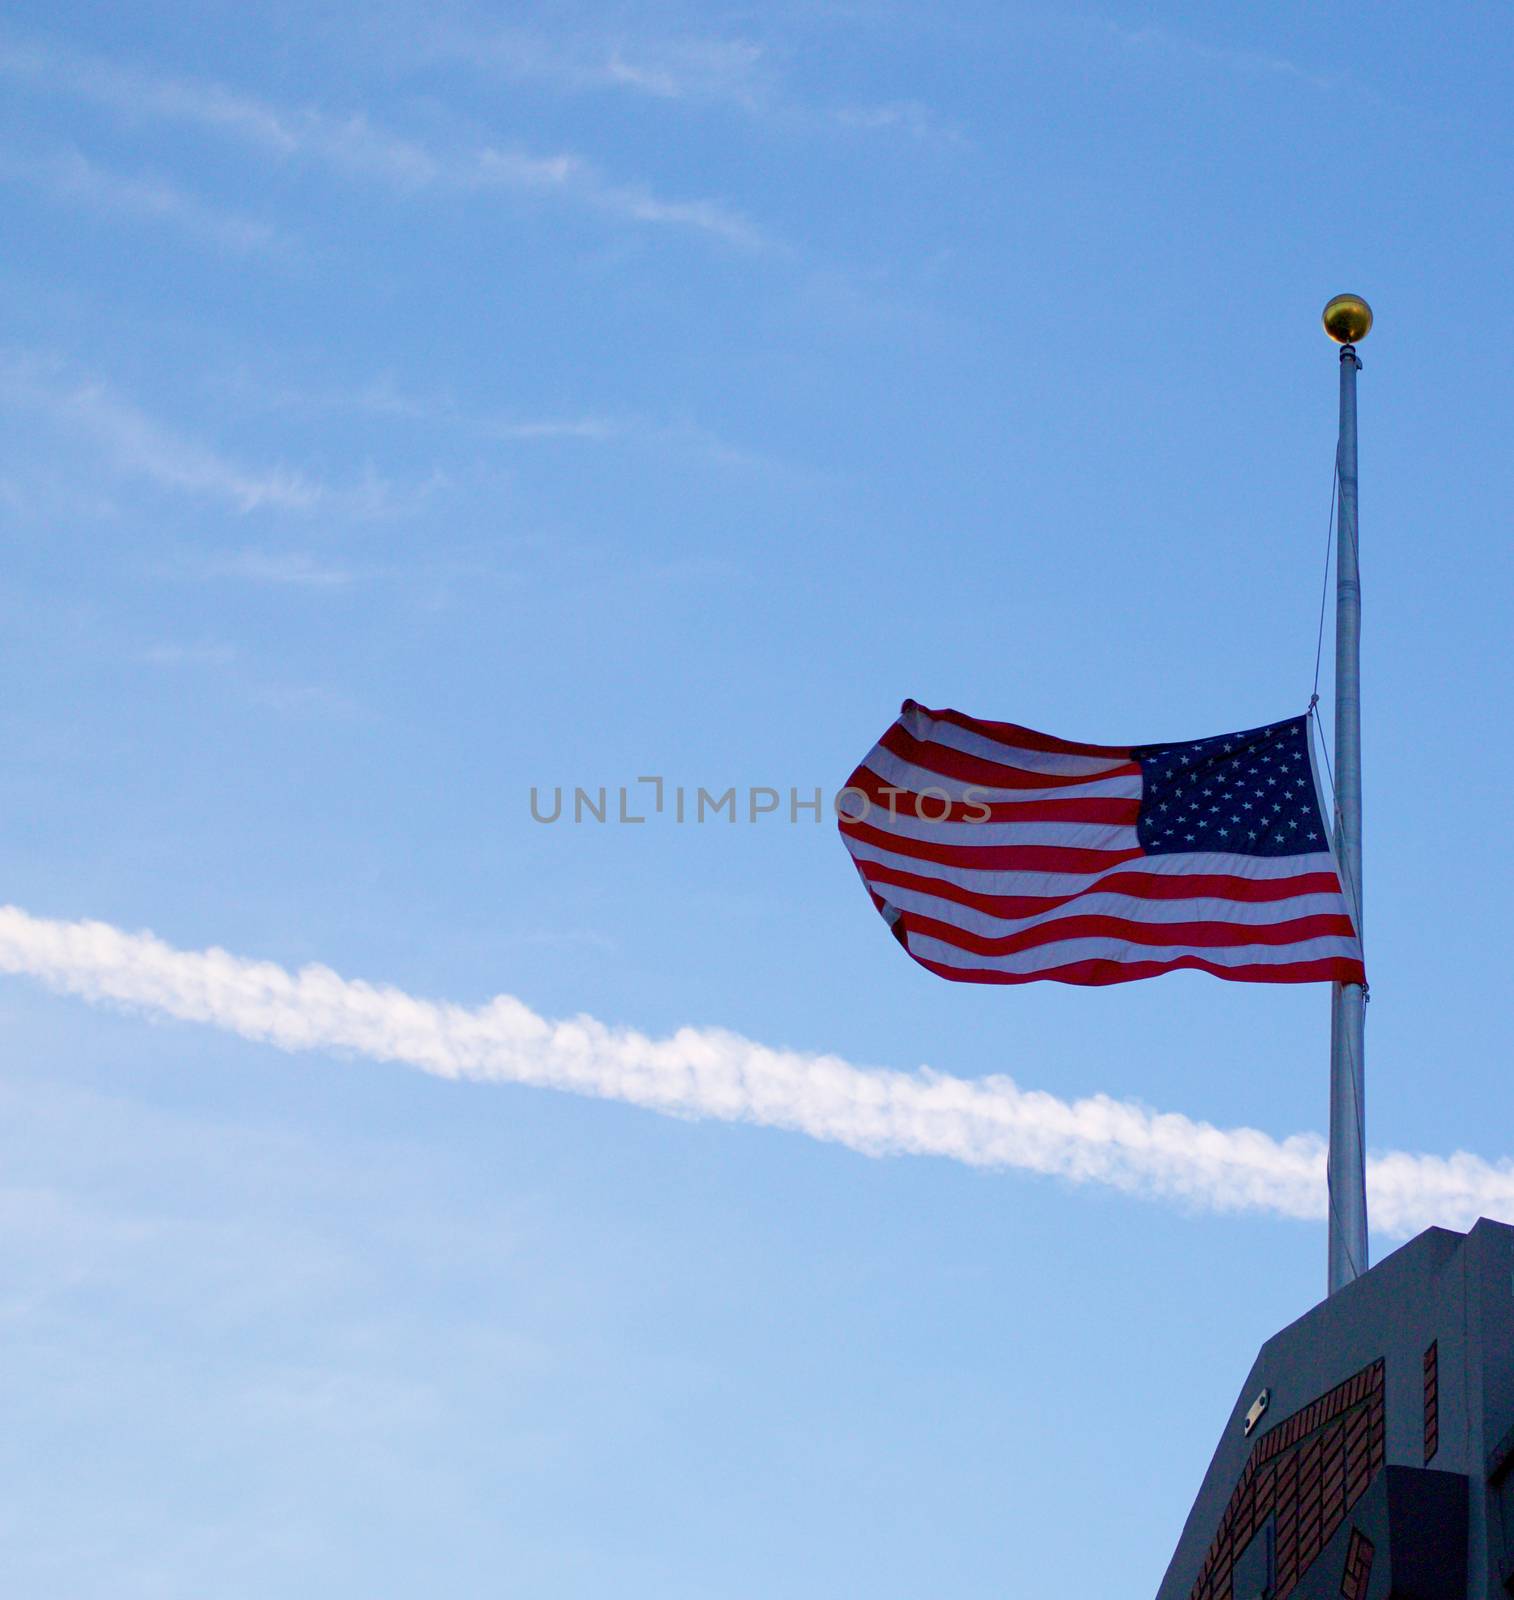 US Flag at half mast on top of a building